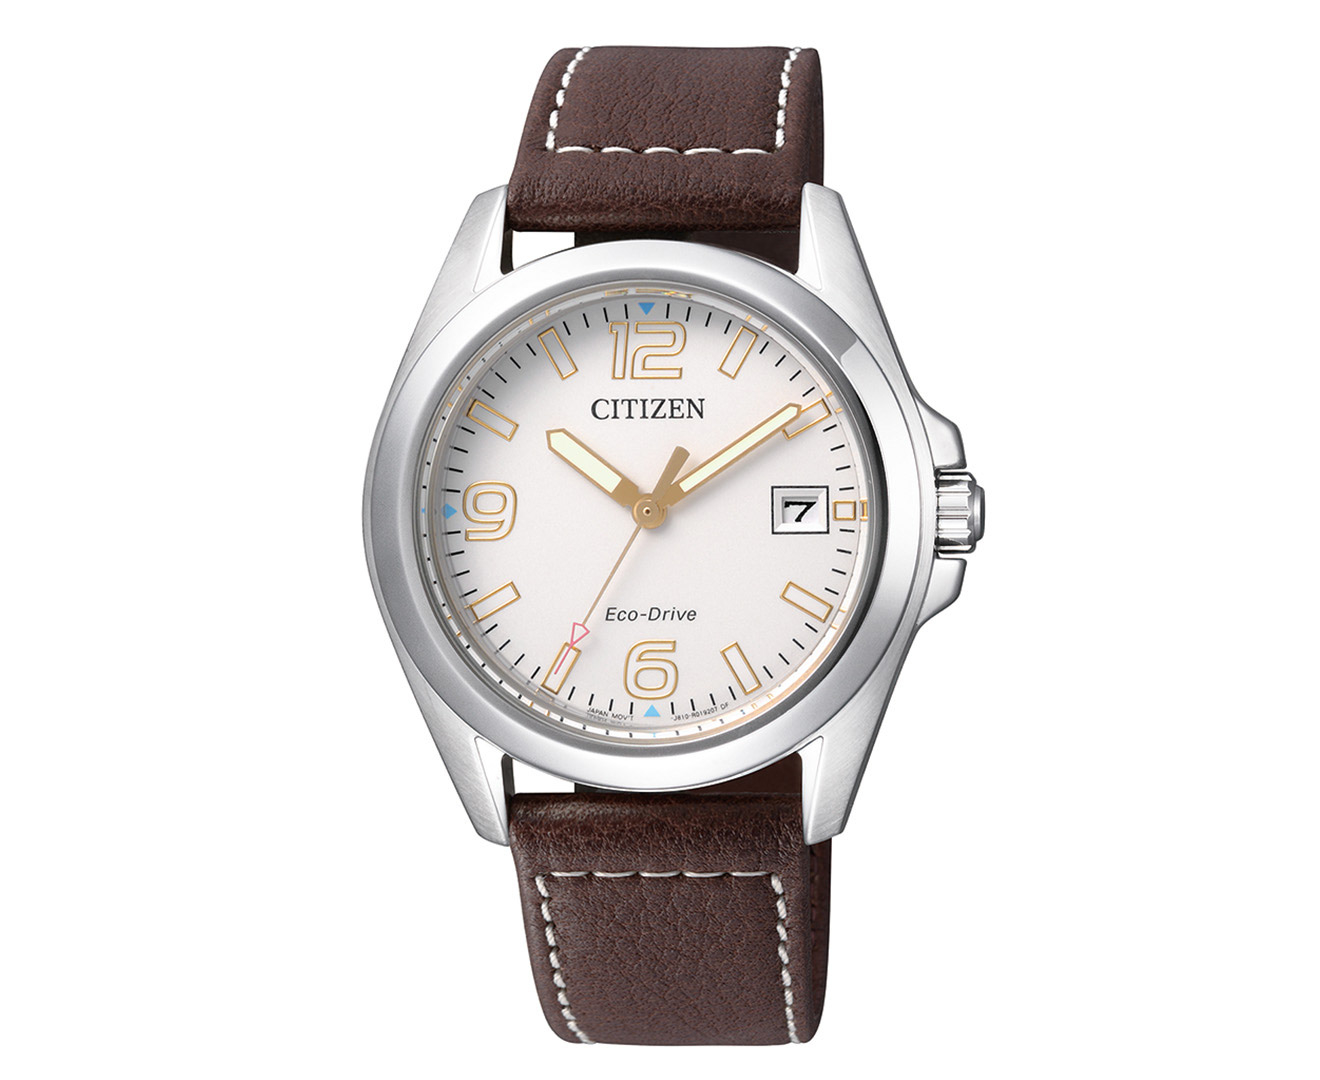 Citizen 35mm Eco-Drive FE603001A Leather Band Watch - Brown/Silver ...